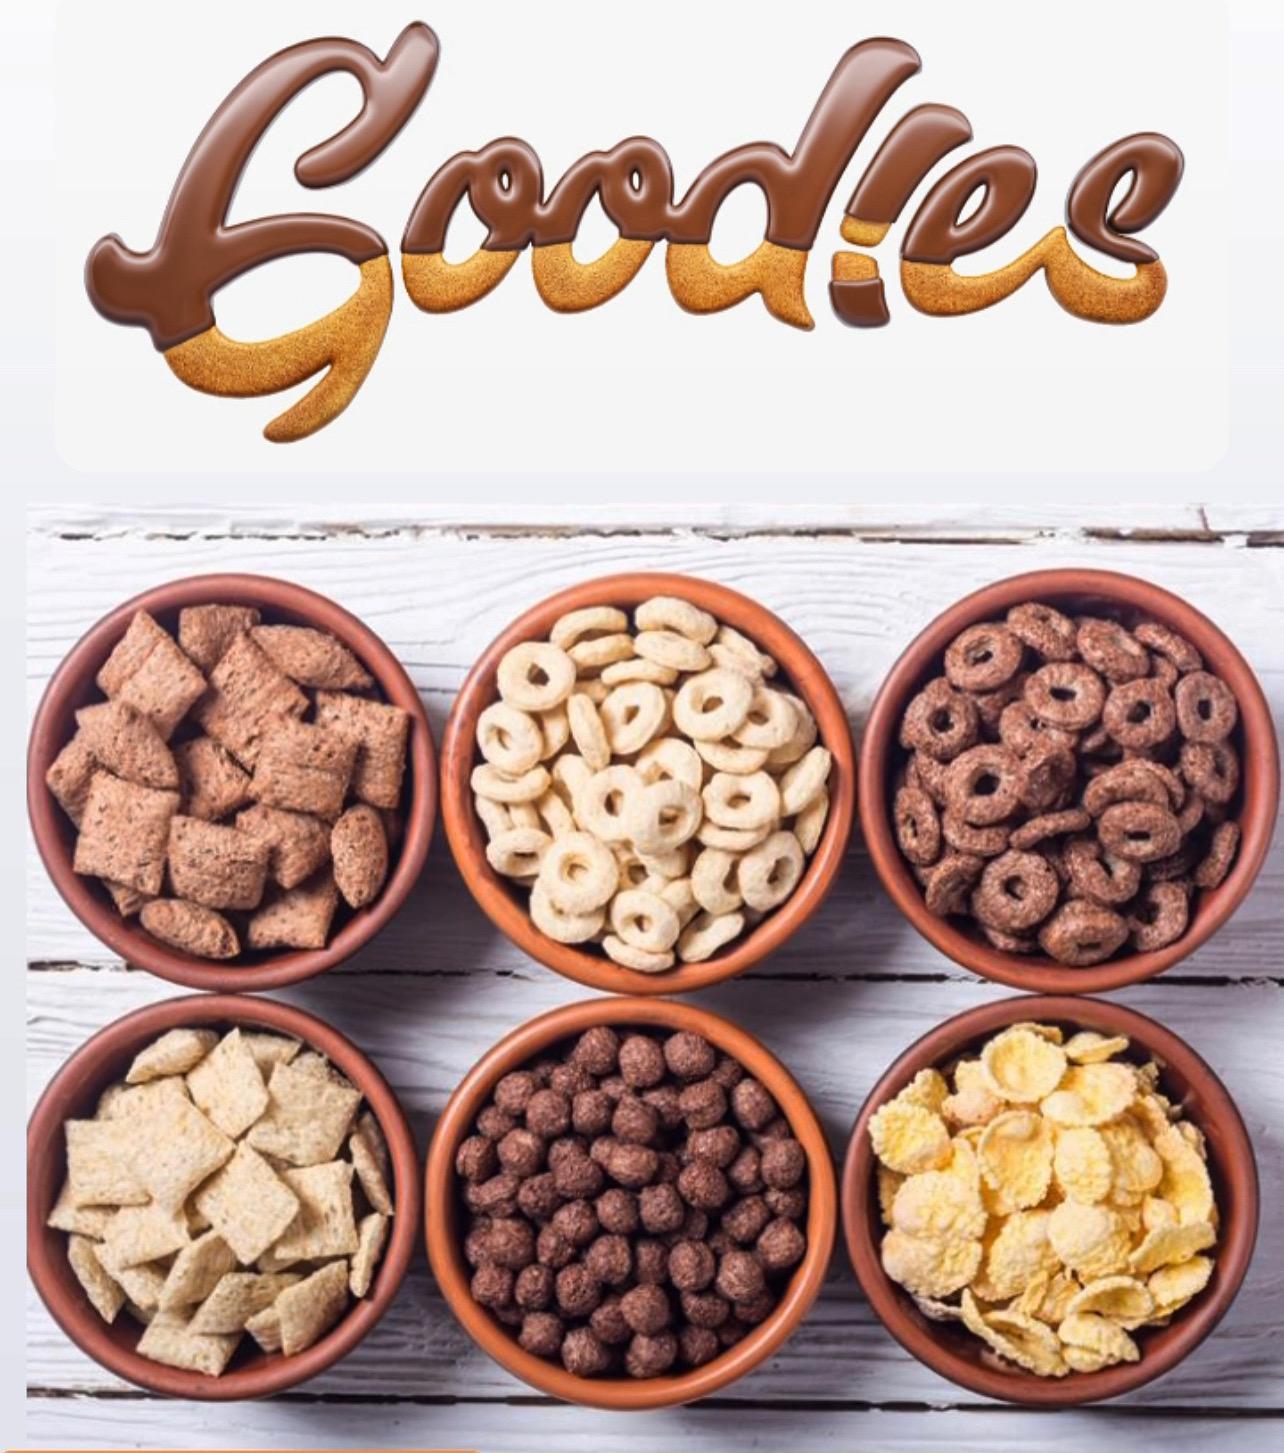 Goodies Global is a great international food brand that provides healthy grains for your best health.